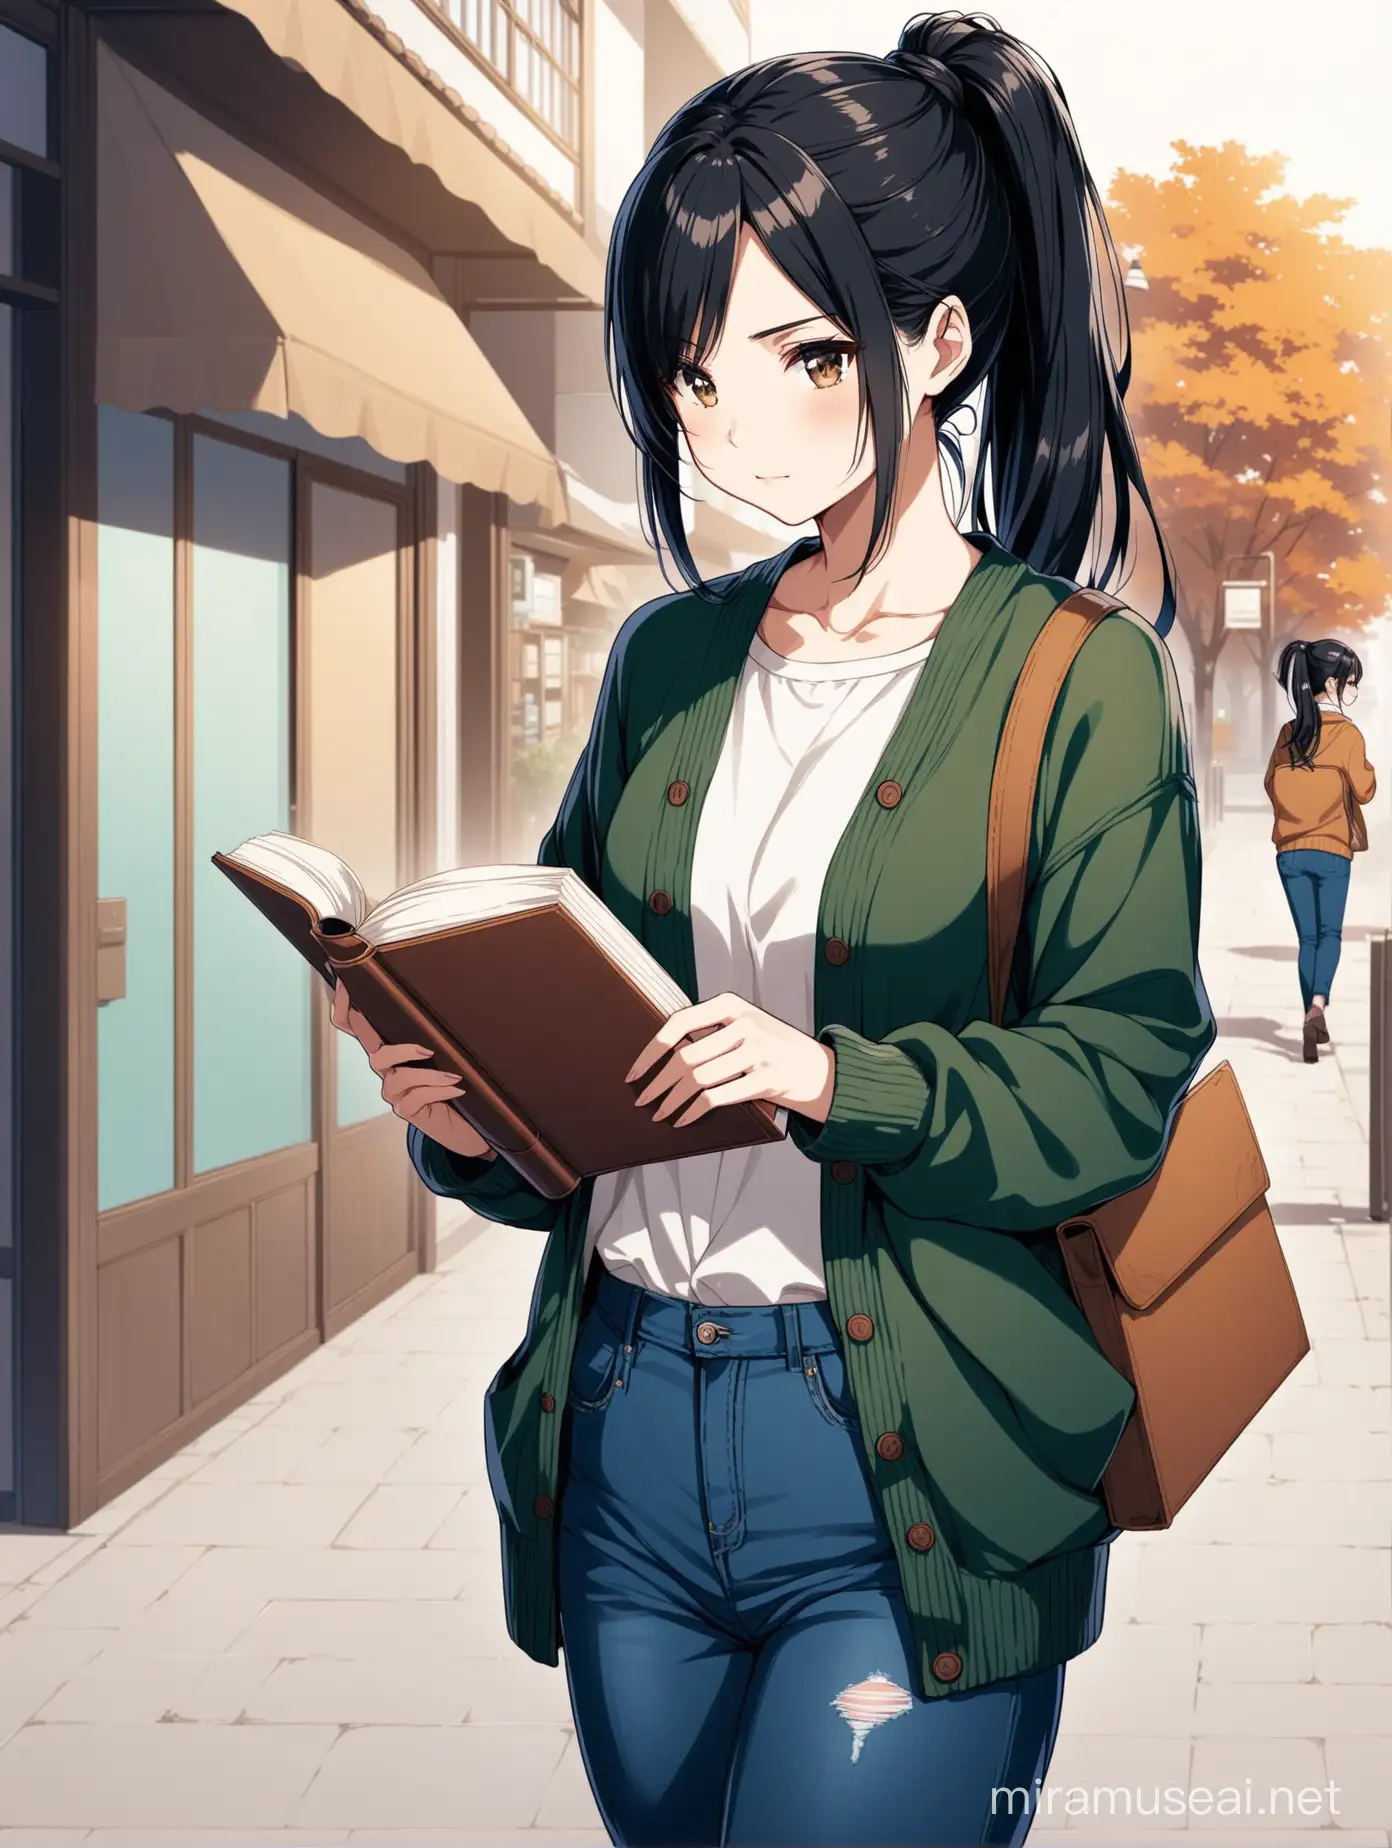 Stylish Woman with Ponytail Book and Coffee